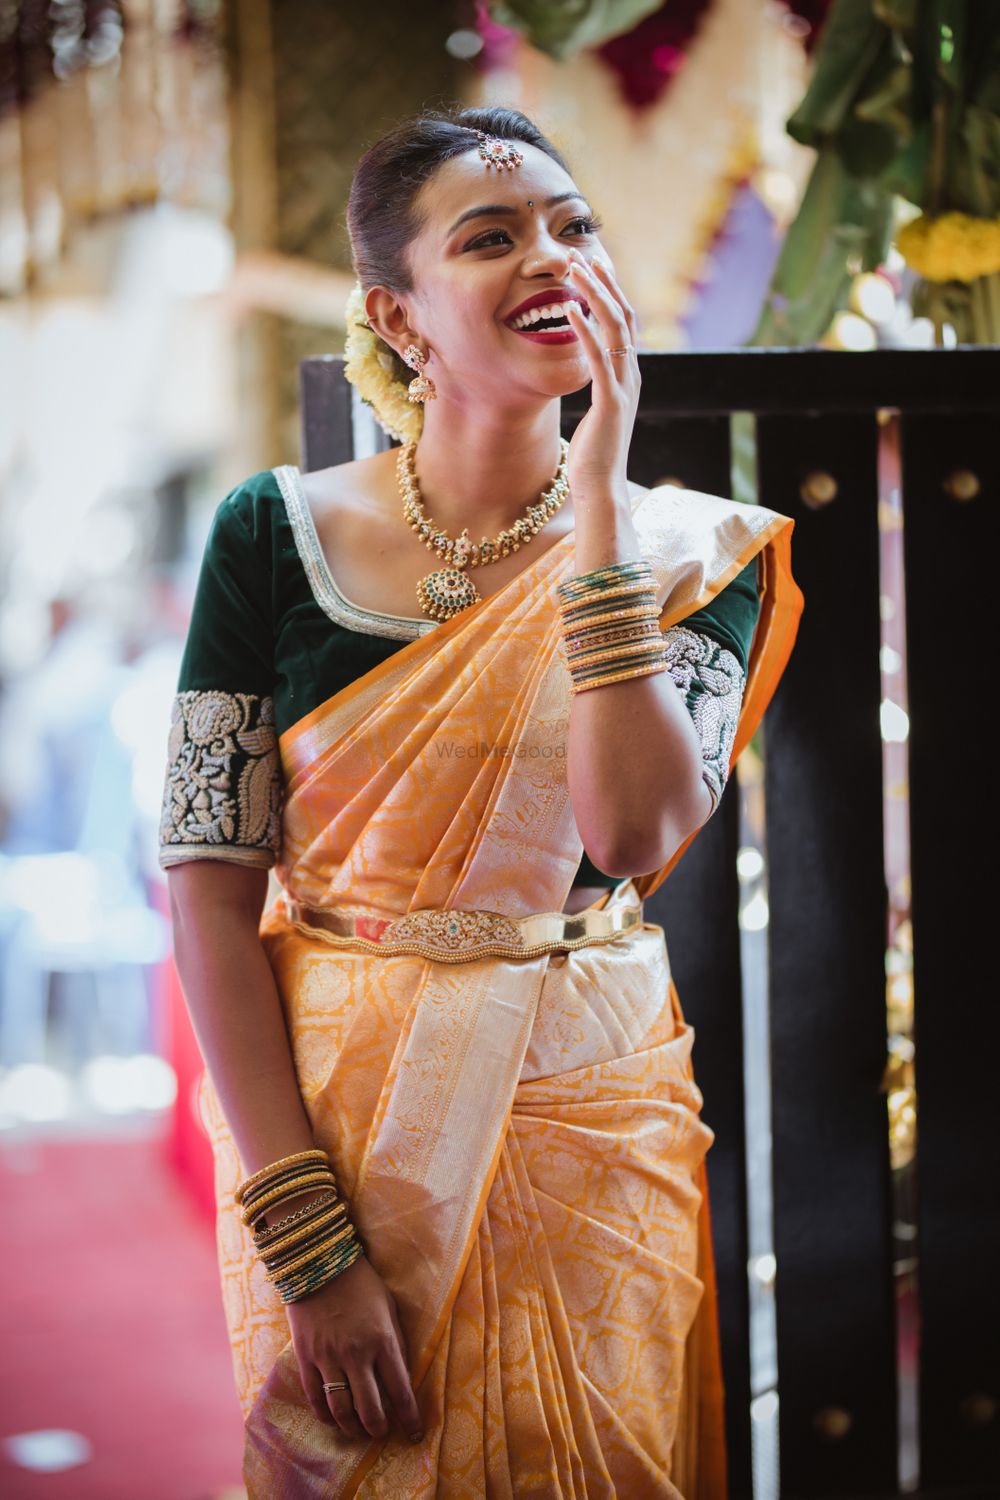 Photo of South Indian bride wearing a yellow saree with an emerald green blouse